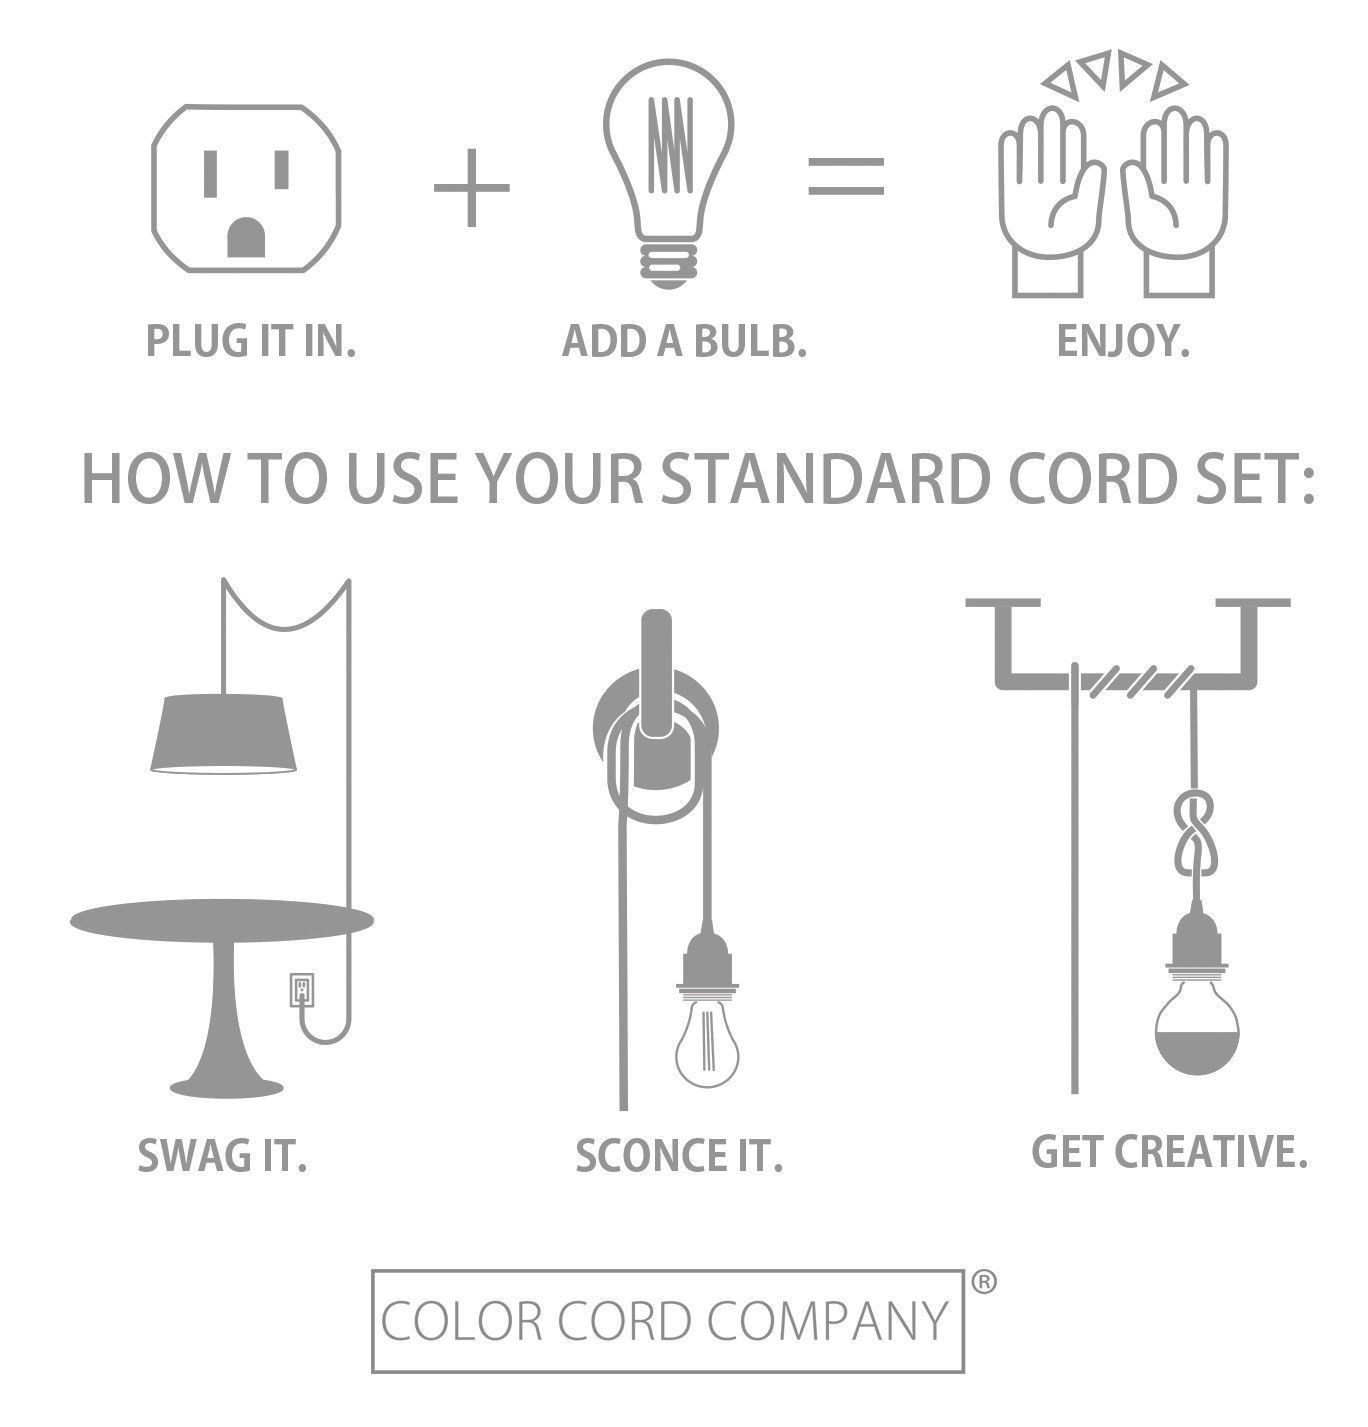 CS 002 001 Plug in pendant light cord set UL listed File No E Overall Length 15 with 2 between plug and switch Threaded ring to hold